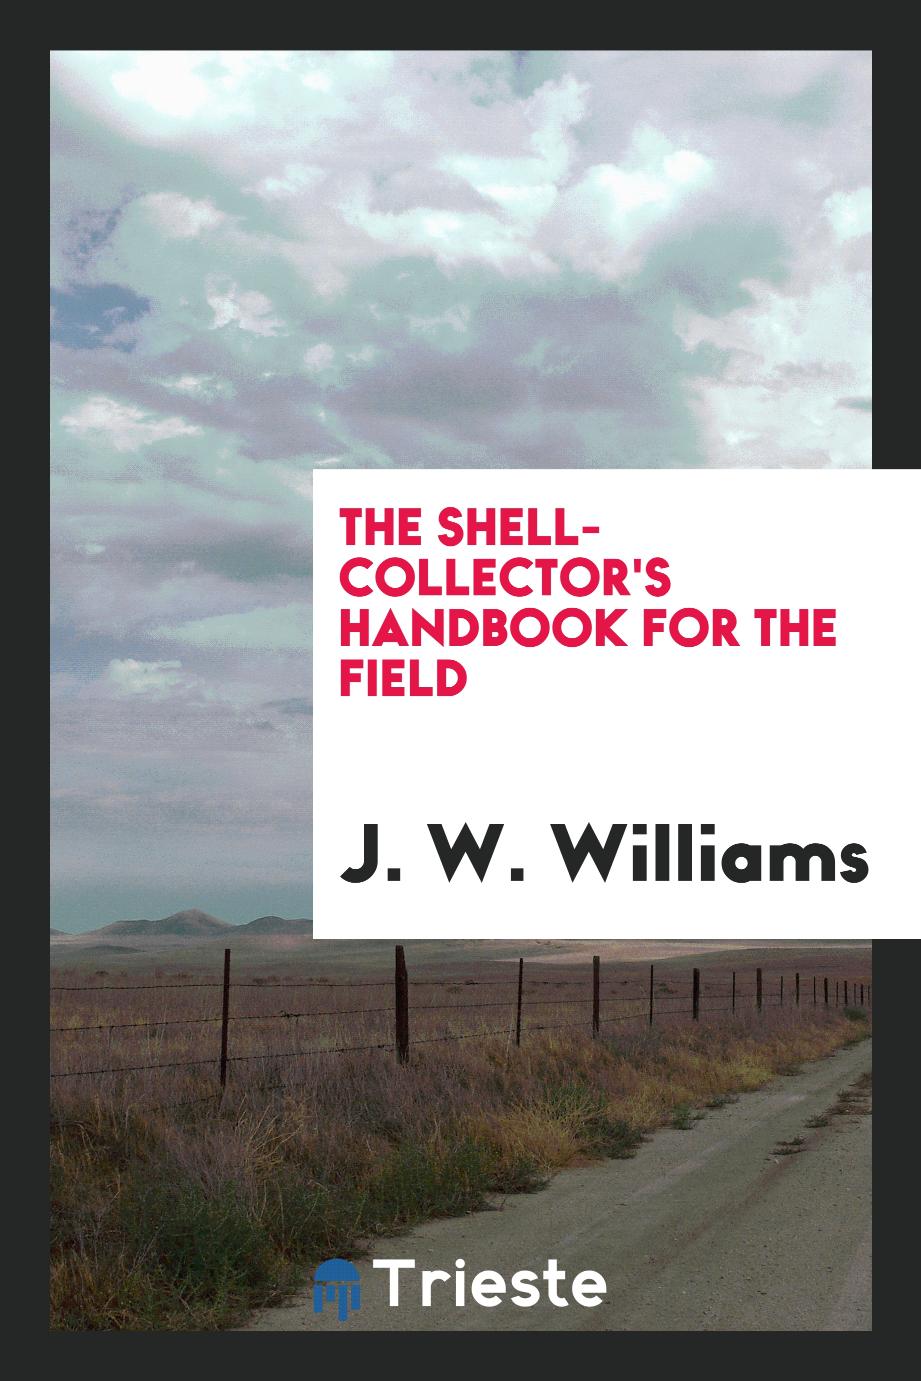 The shell-collector's handbook for the field